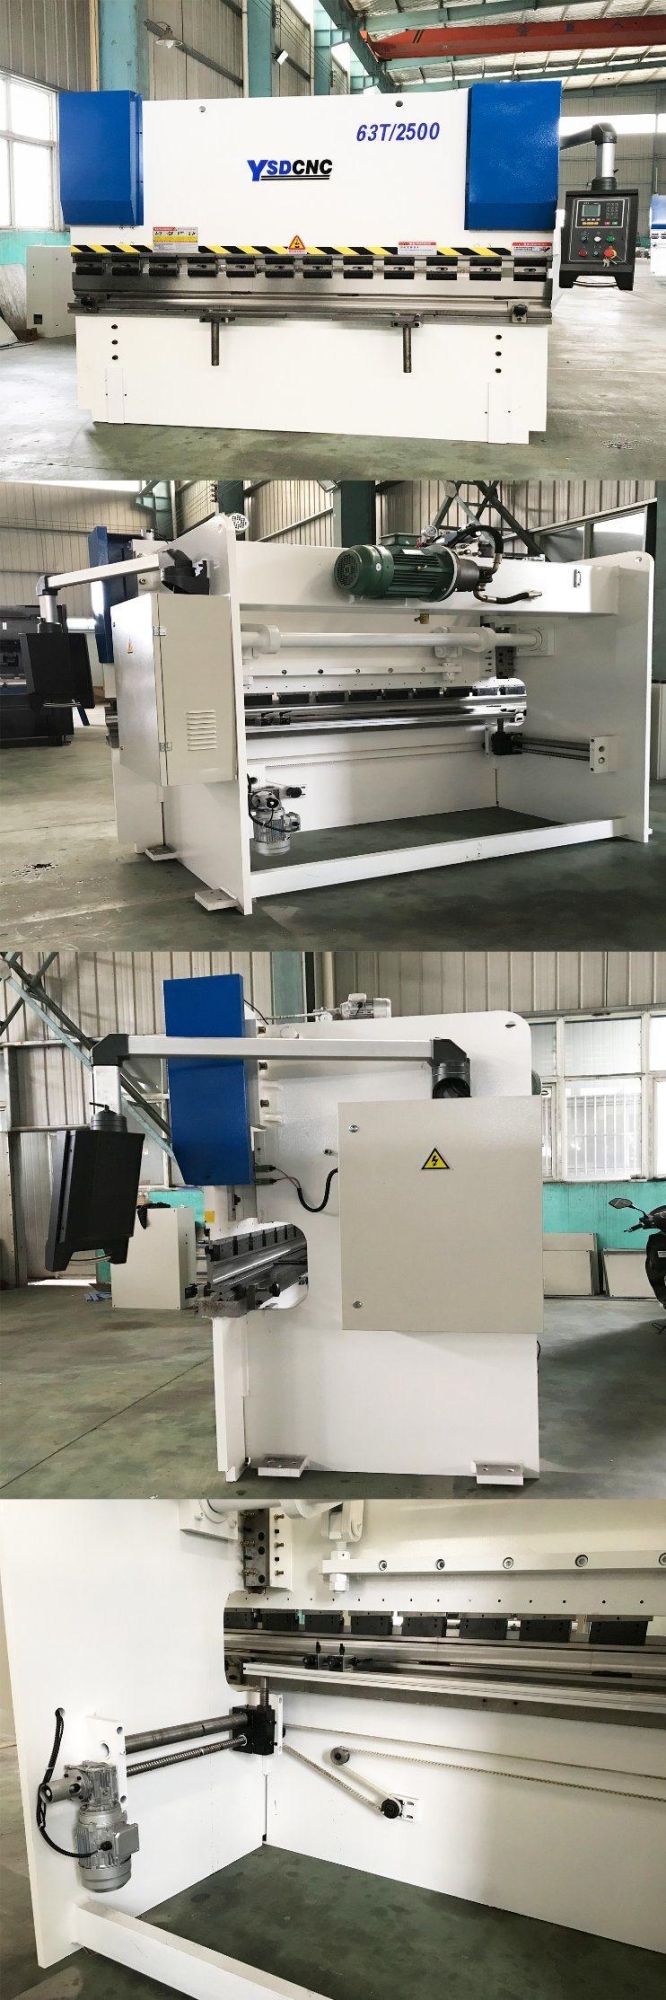 Nc Bending Machine with Schneider Electric Components